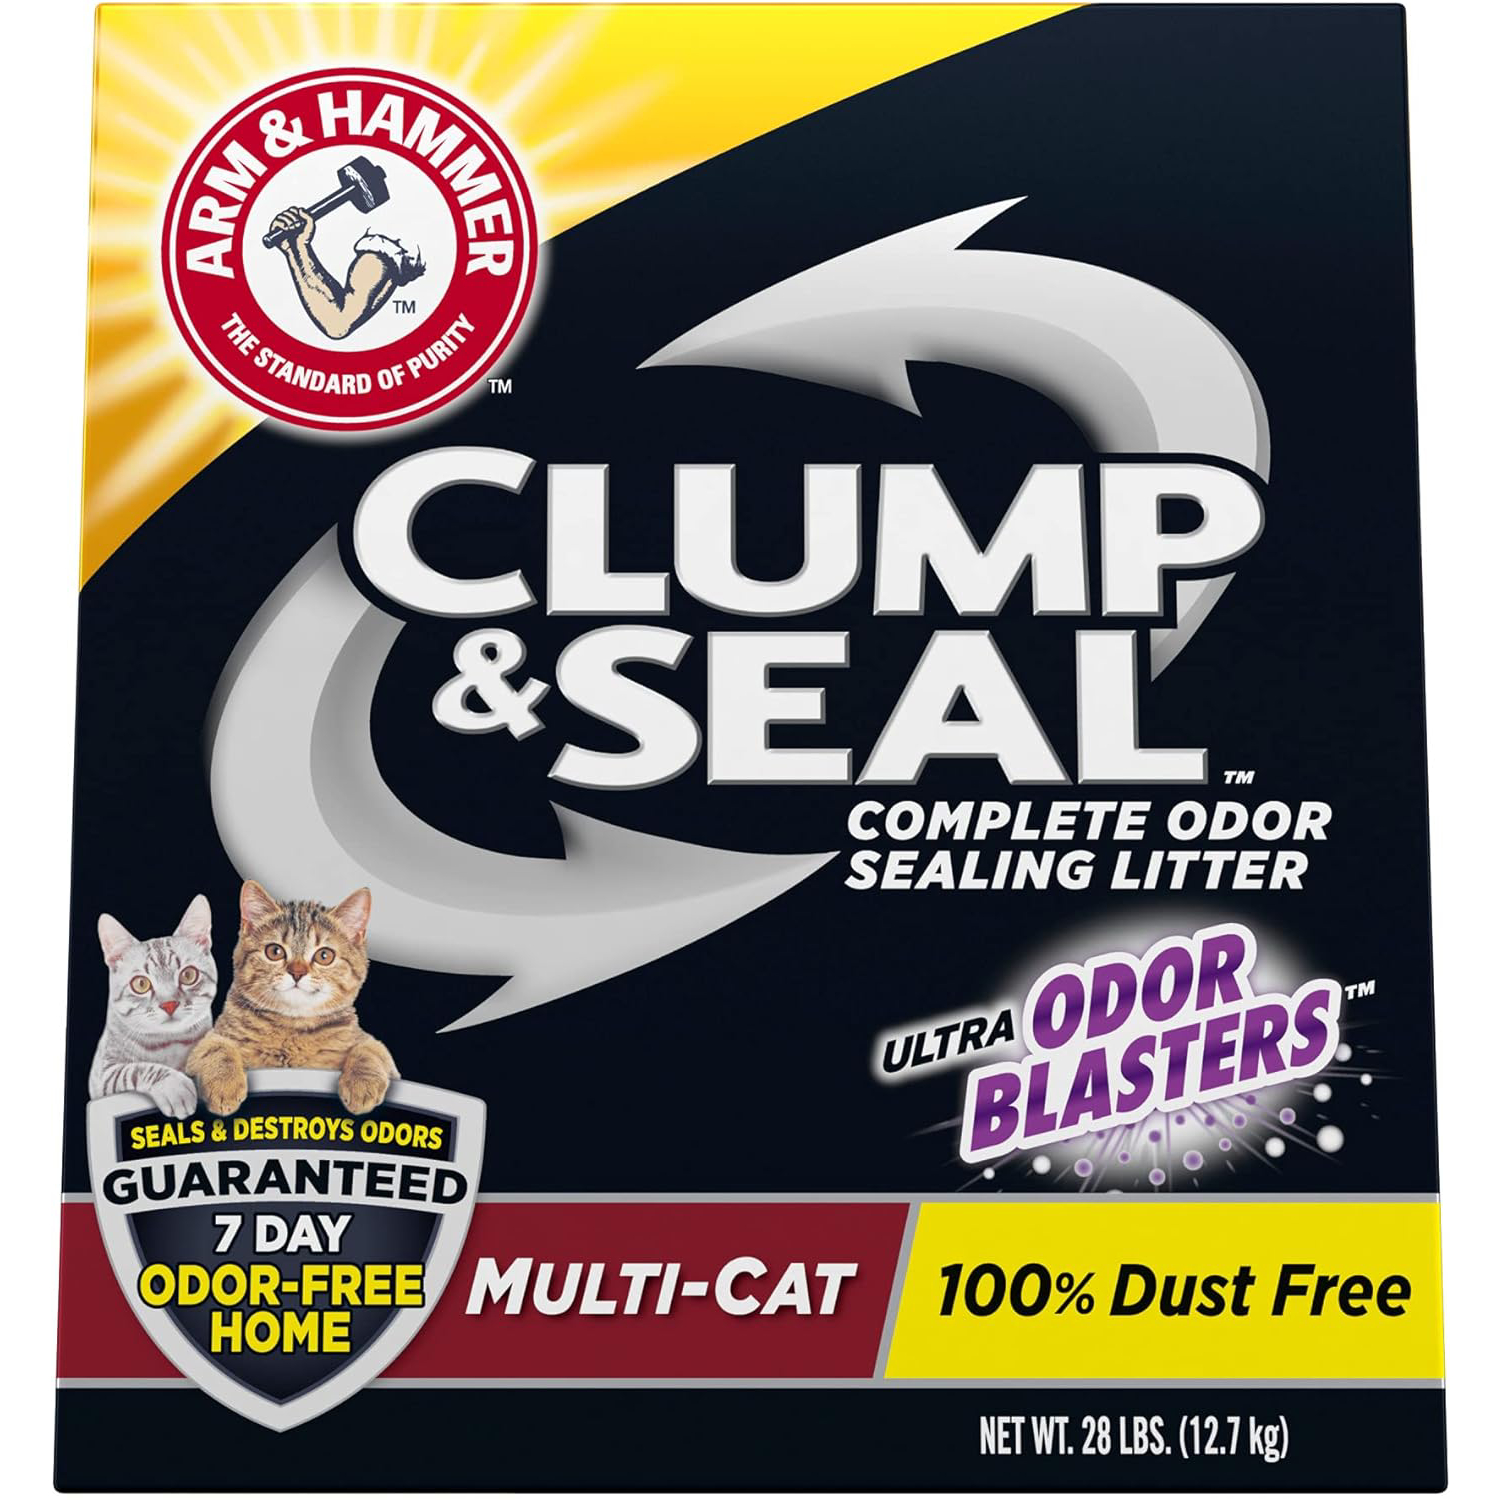 Arm Hammer Clump Seal Litter Multi-Cat Complete Odor Sealing Clumping Clay Cat Litter, 28lb new